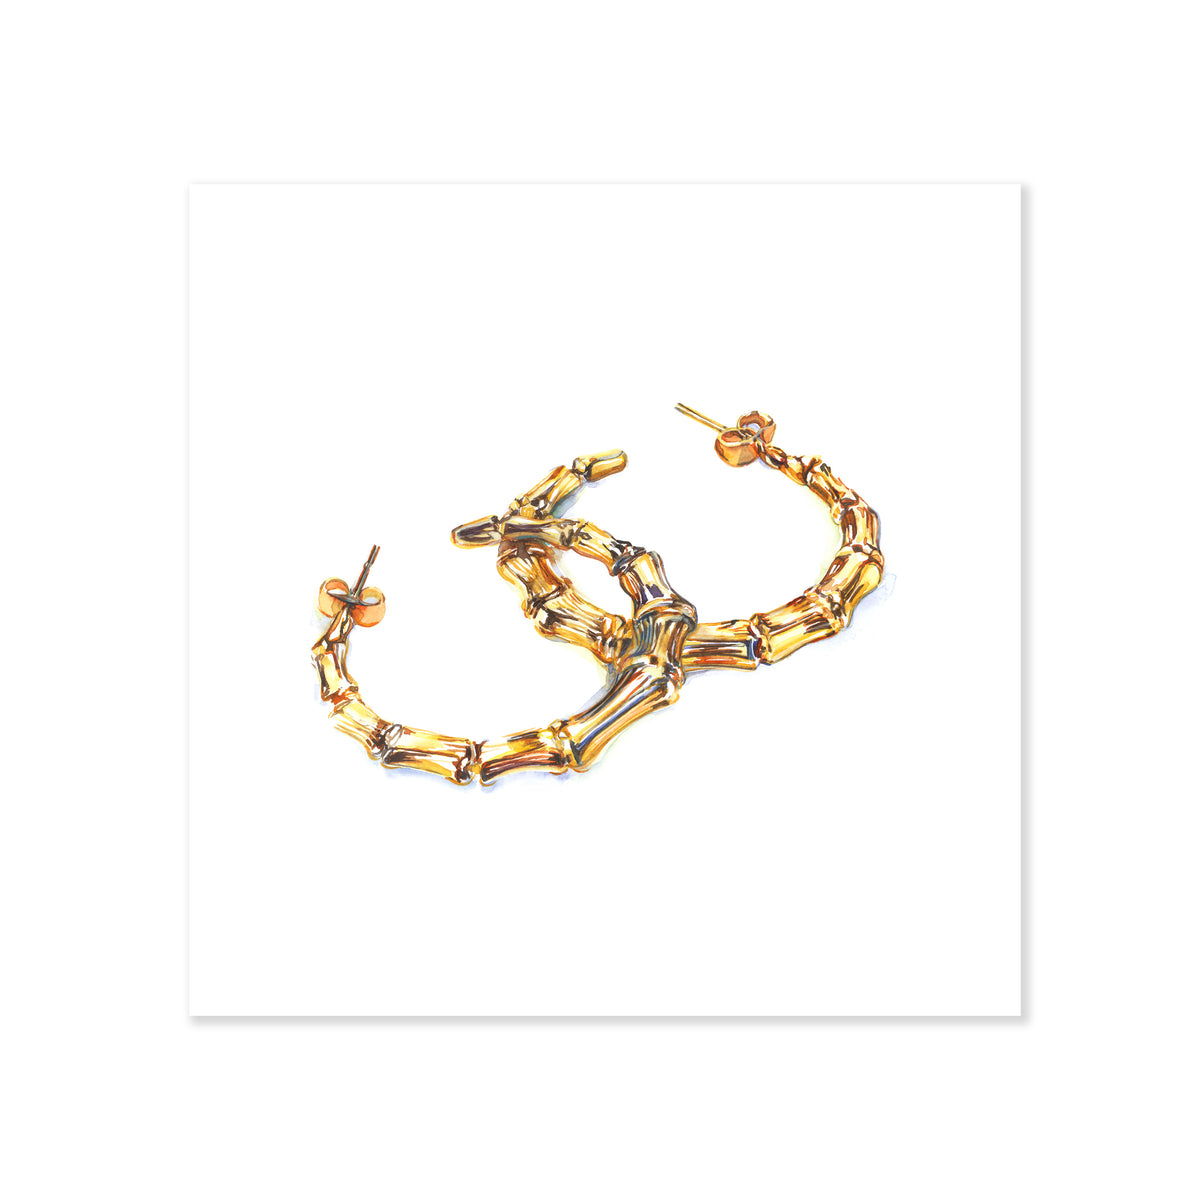 a fine art print illustrating two gold hoop earrings with a bamboo design laid on top of one another drawn with watercolor on a soft white background